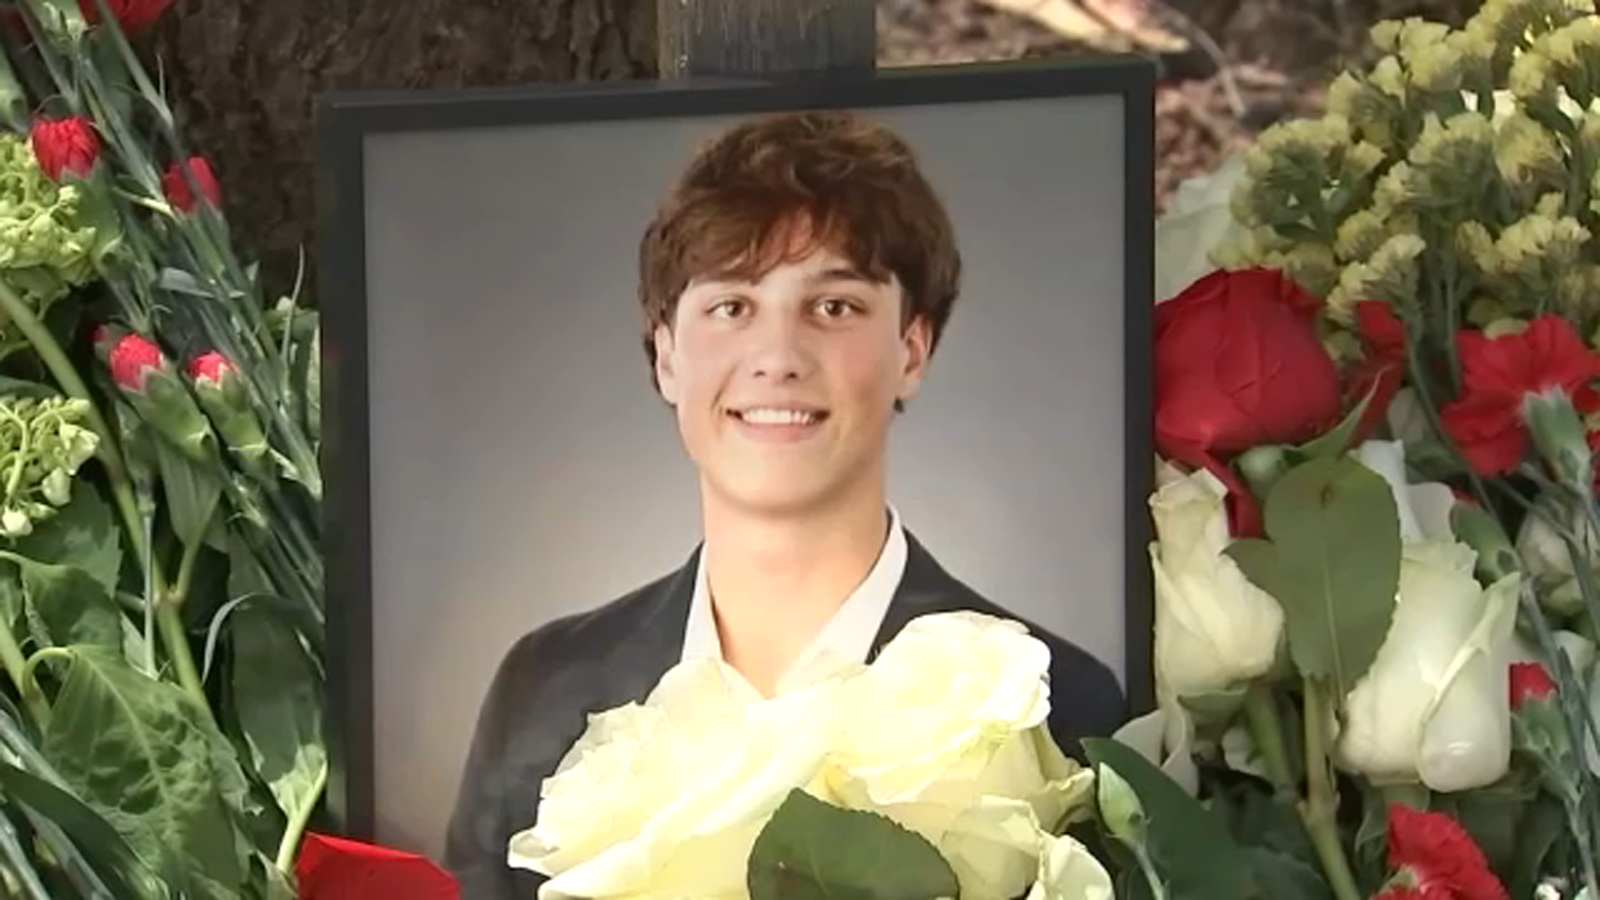 Family of Glenbrook South High School’s Marko Niketic, teen killed in Glenview car accident, to hold funeral at St. Sava Monastery [Video]